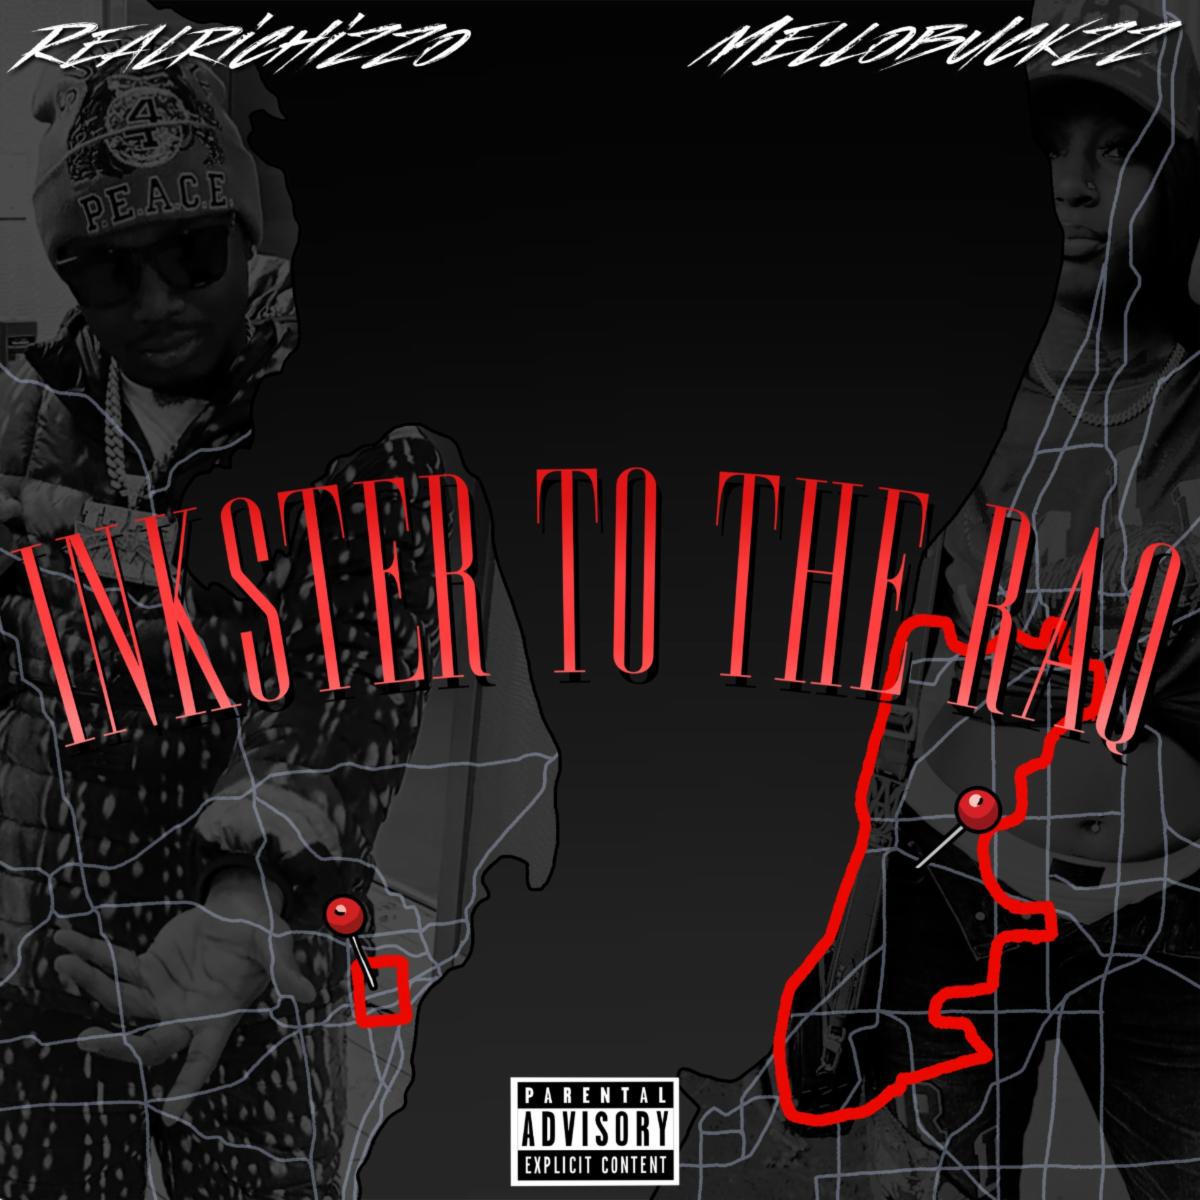 DETROIT'S REALRICHIZZO DROPS FEROCIOUS NEW SINGLE “INKSTER OF THE RAQ” OUT NOW VIA PRIORITY RECORDS